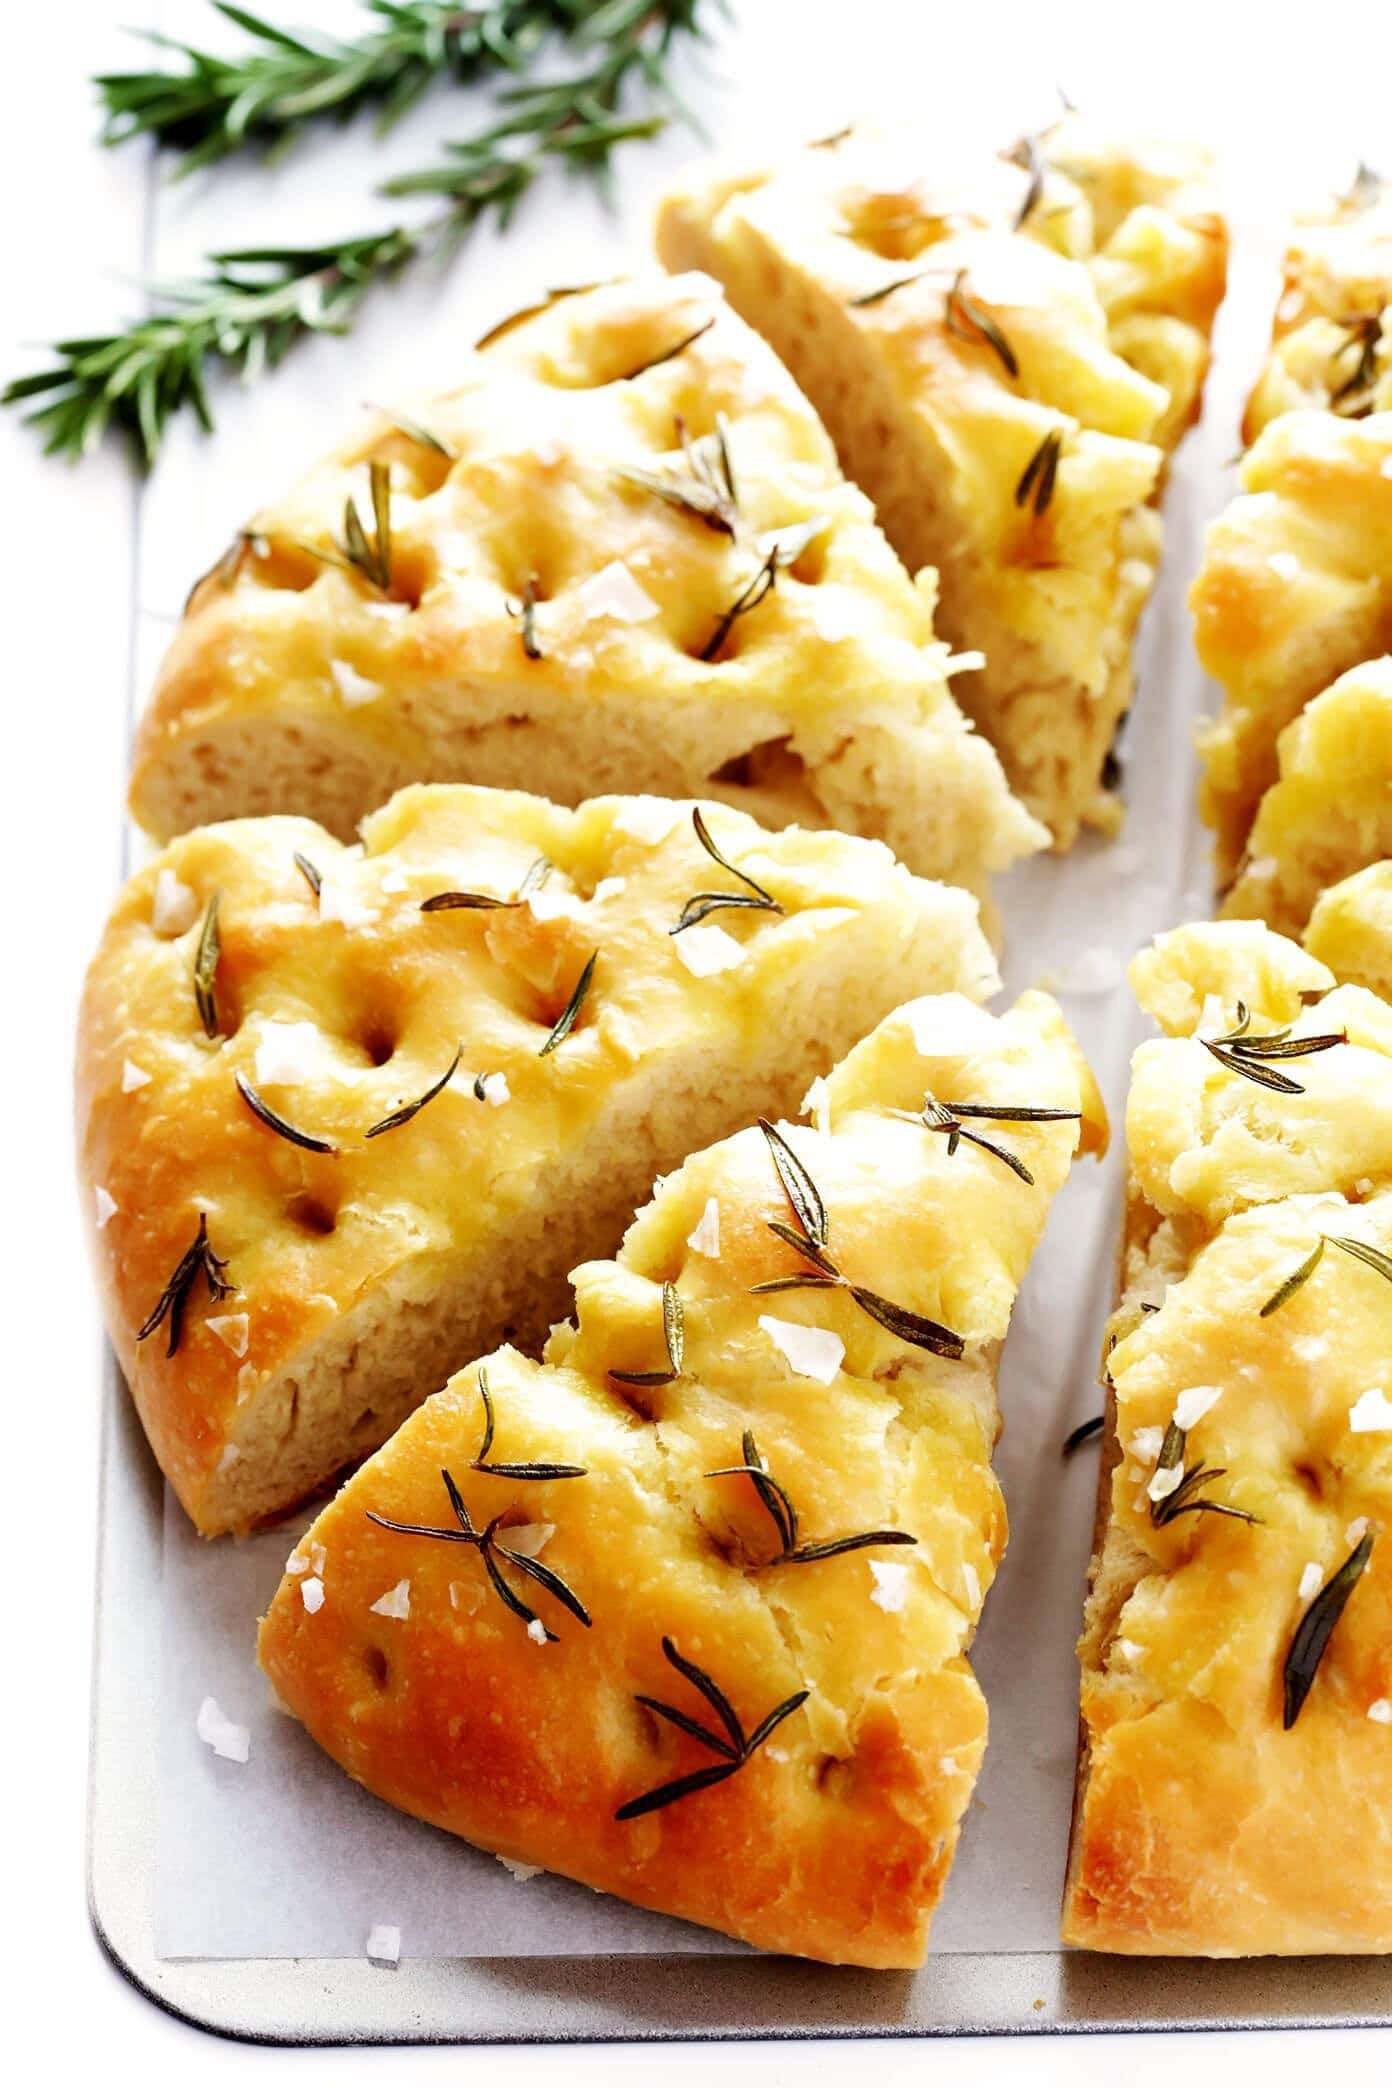 Triangle sliced focaccia bread with rosemary and drizzle of olive oil.